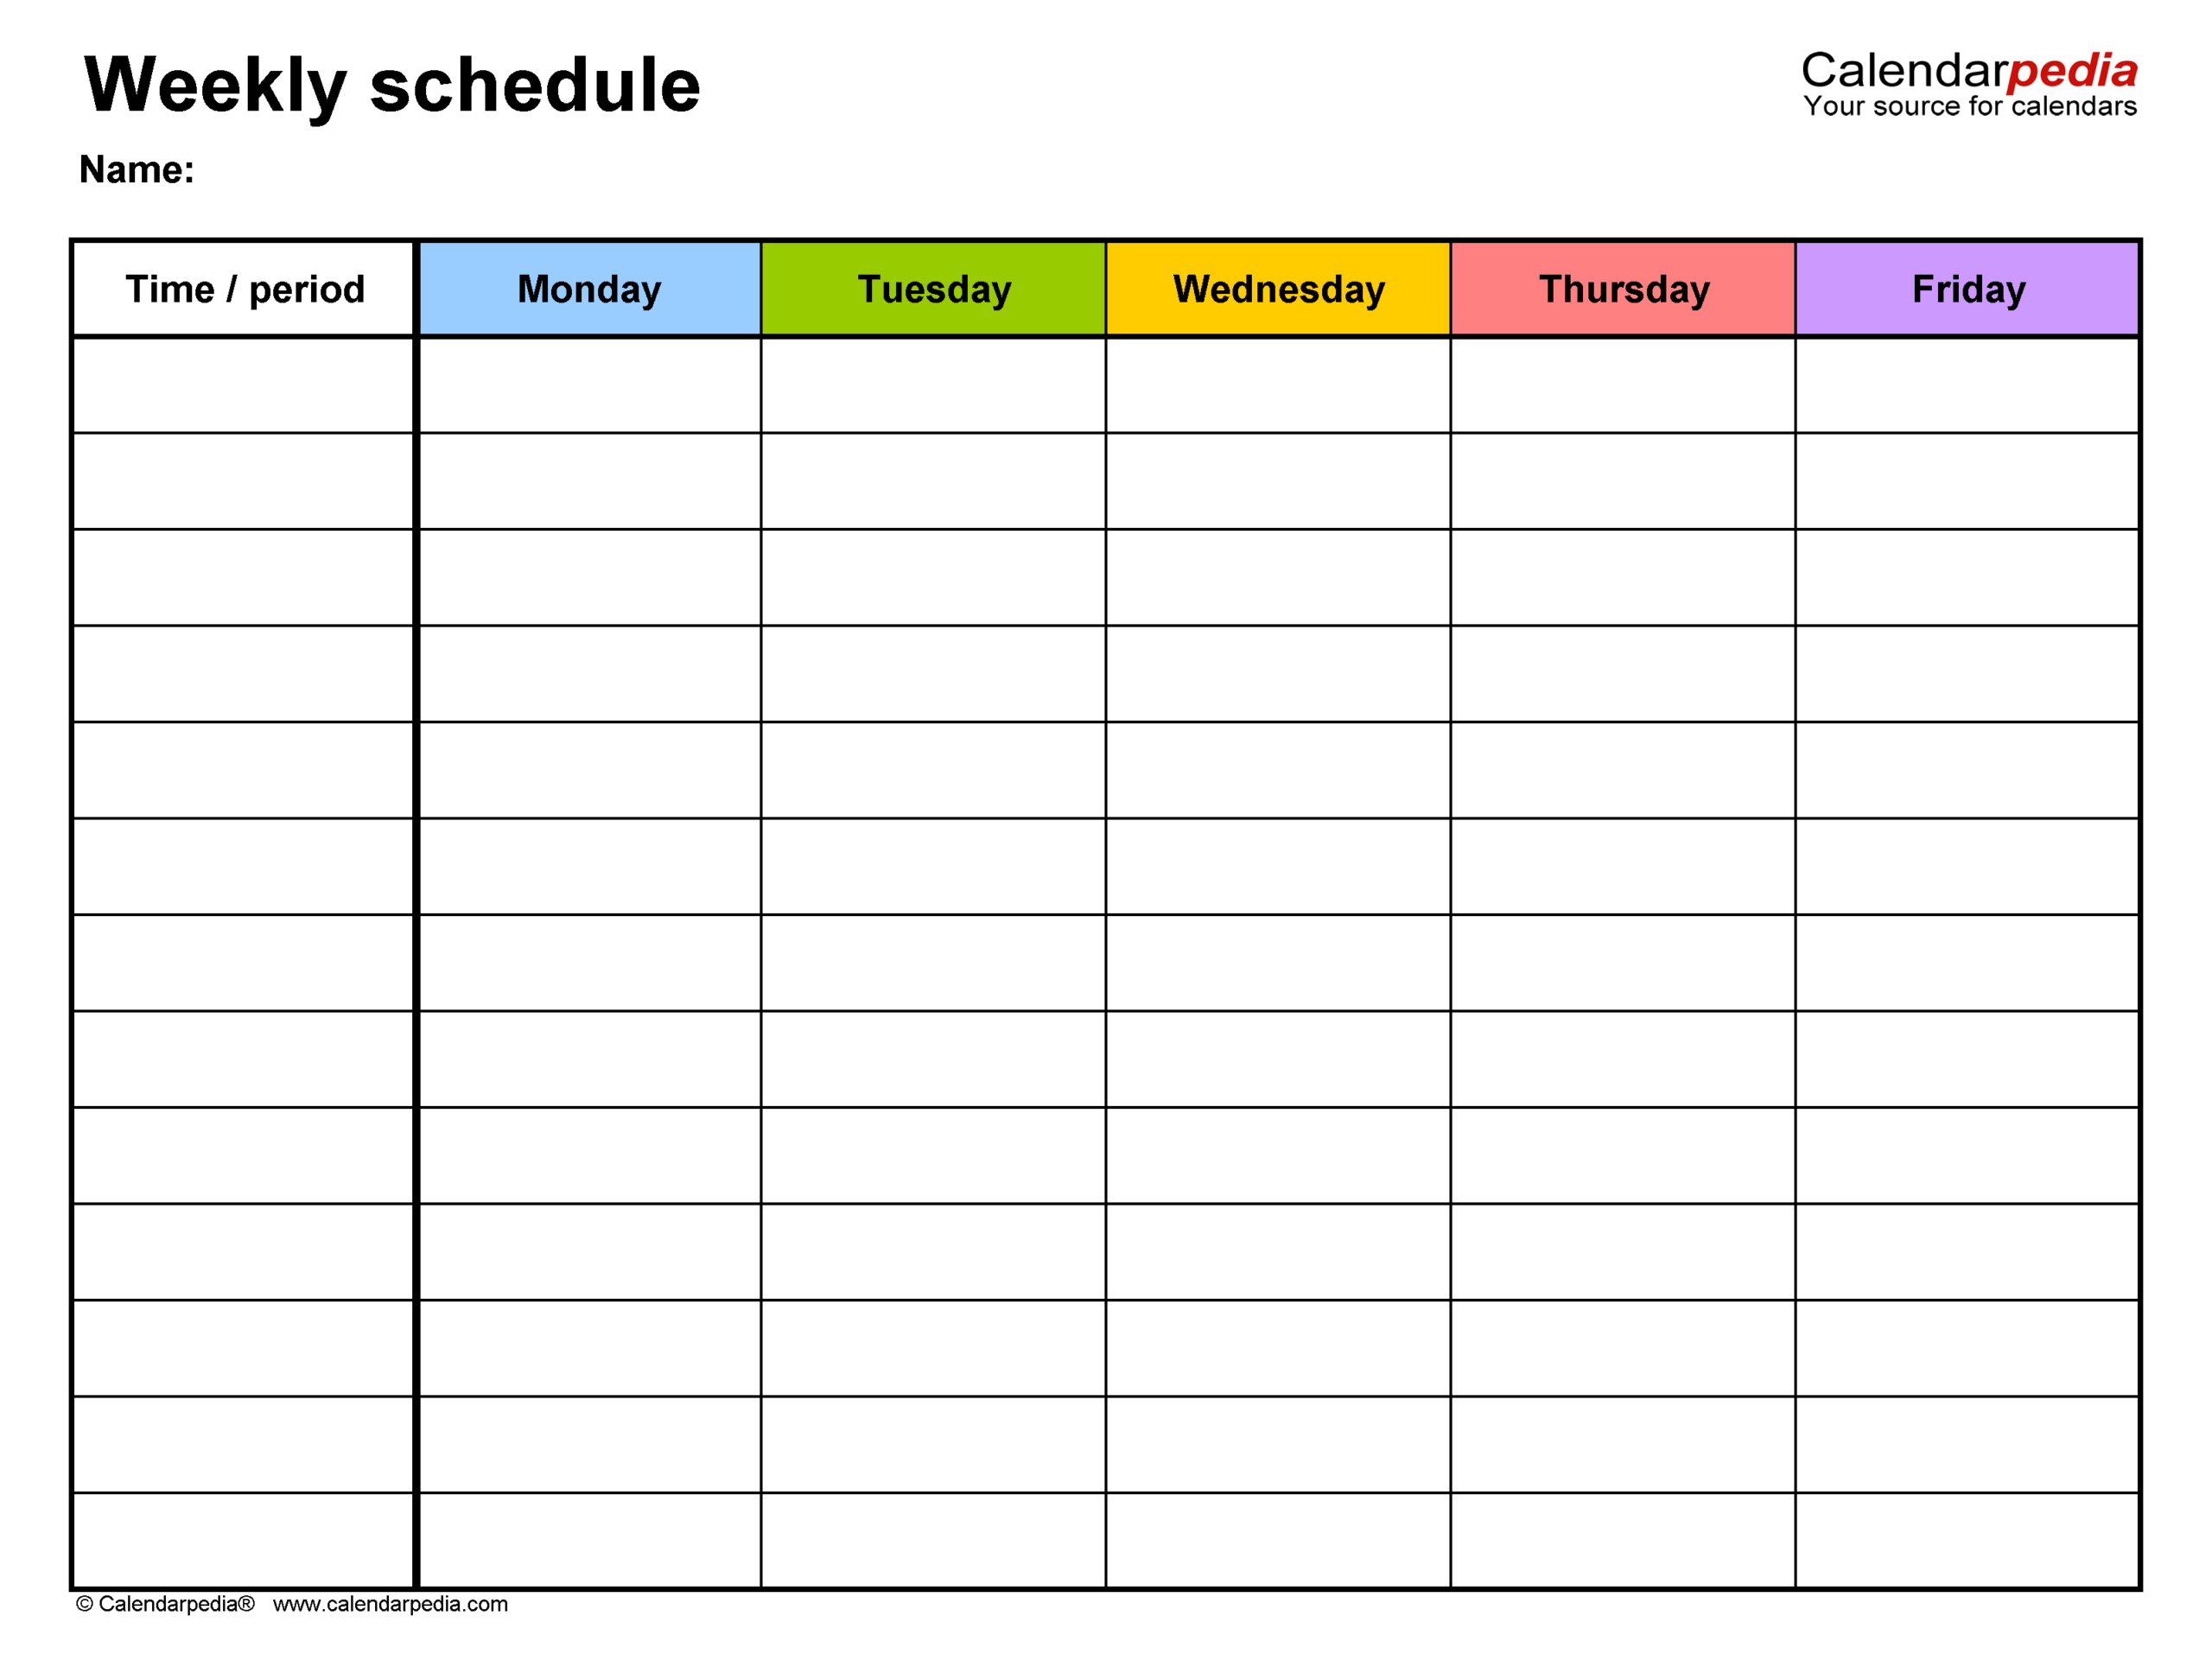 Free Weekly Schedules For Pdf - 18 Templates  Days Of The Week Grid For Workers Hours